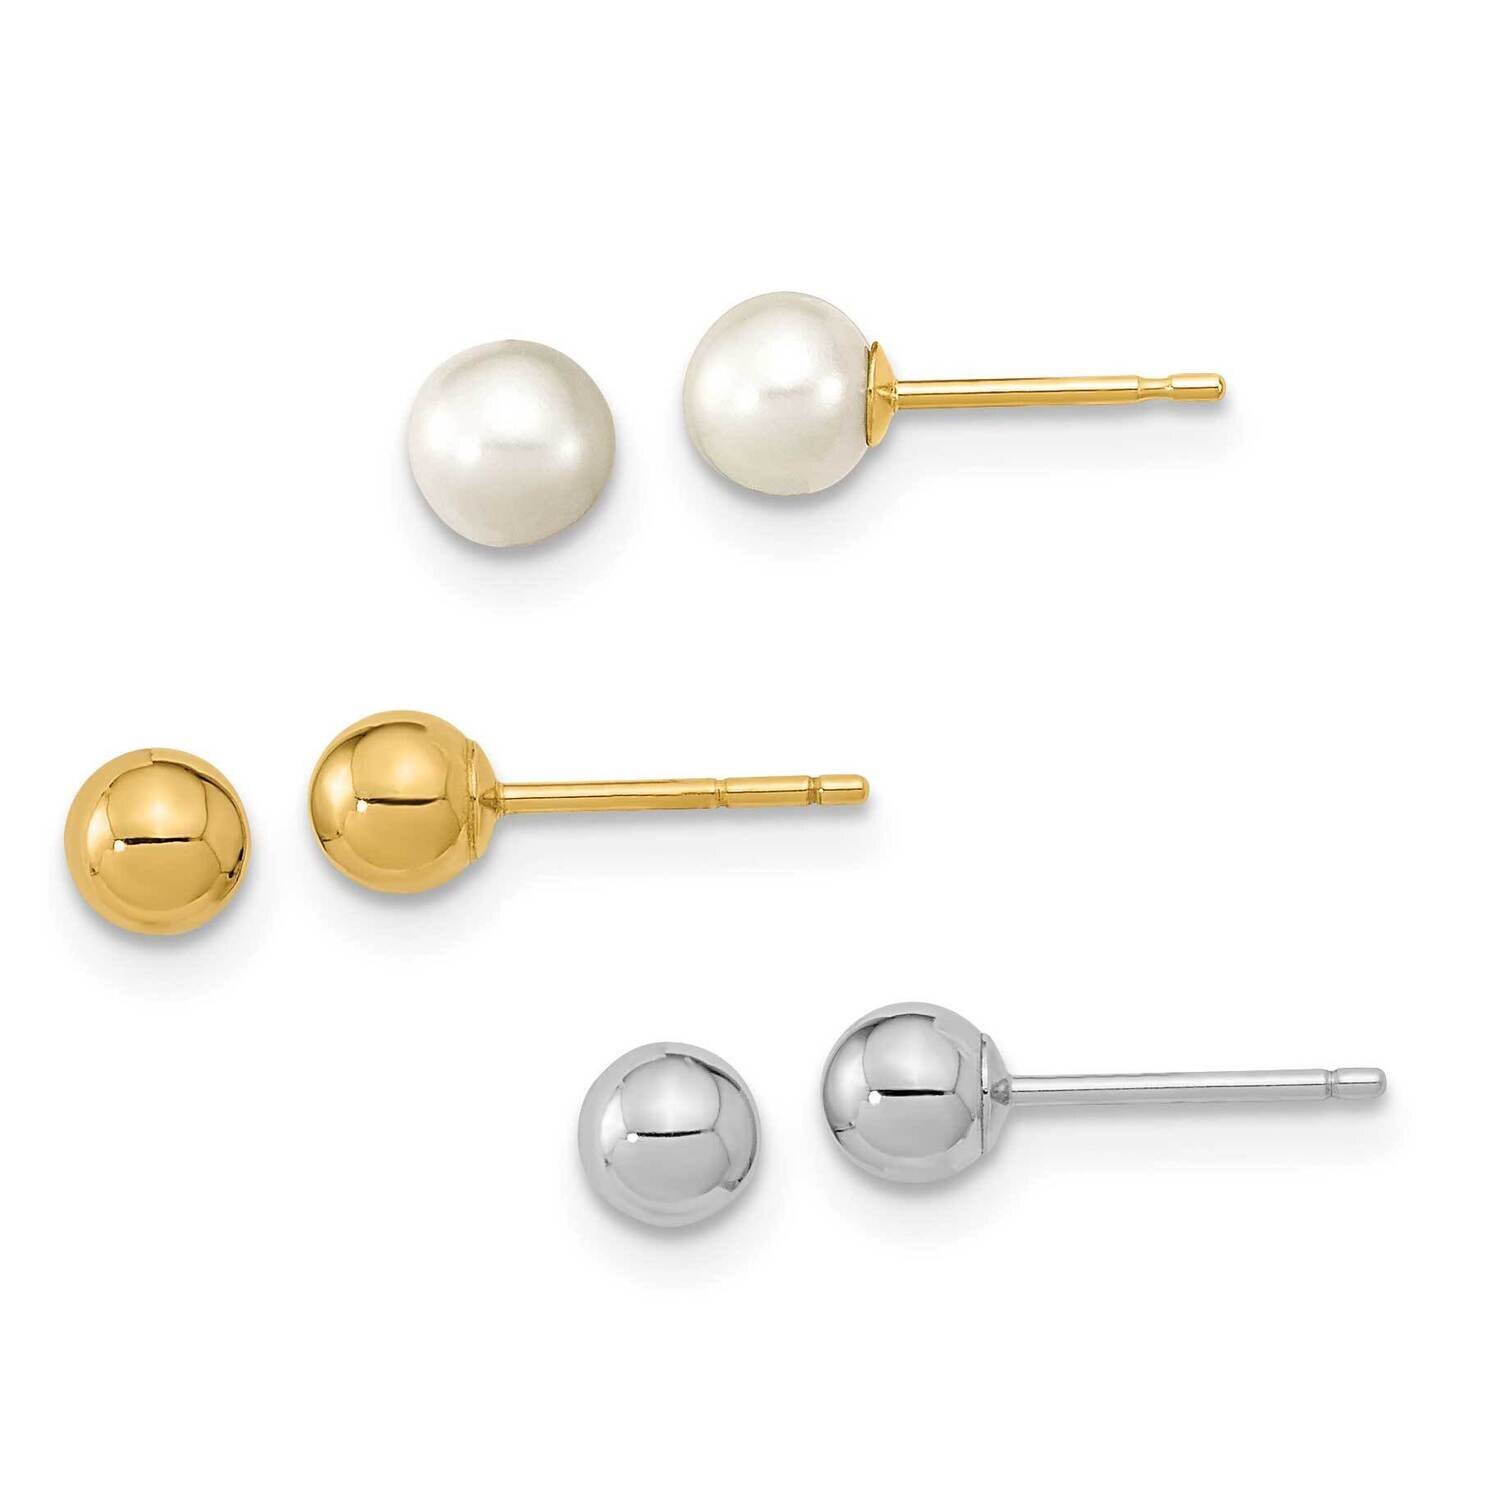 4-5mm Round White Cultured Freshwater Pearl Set Of 3 Earrings 14k Two-tone Gold SE3038